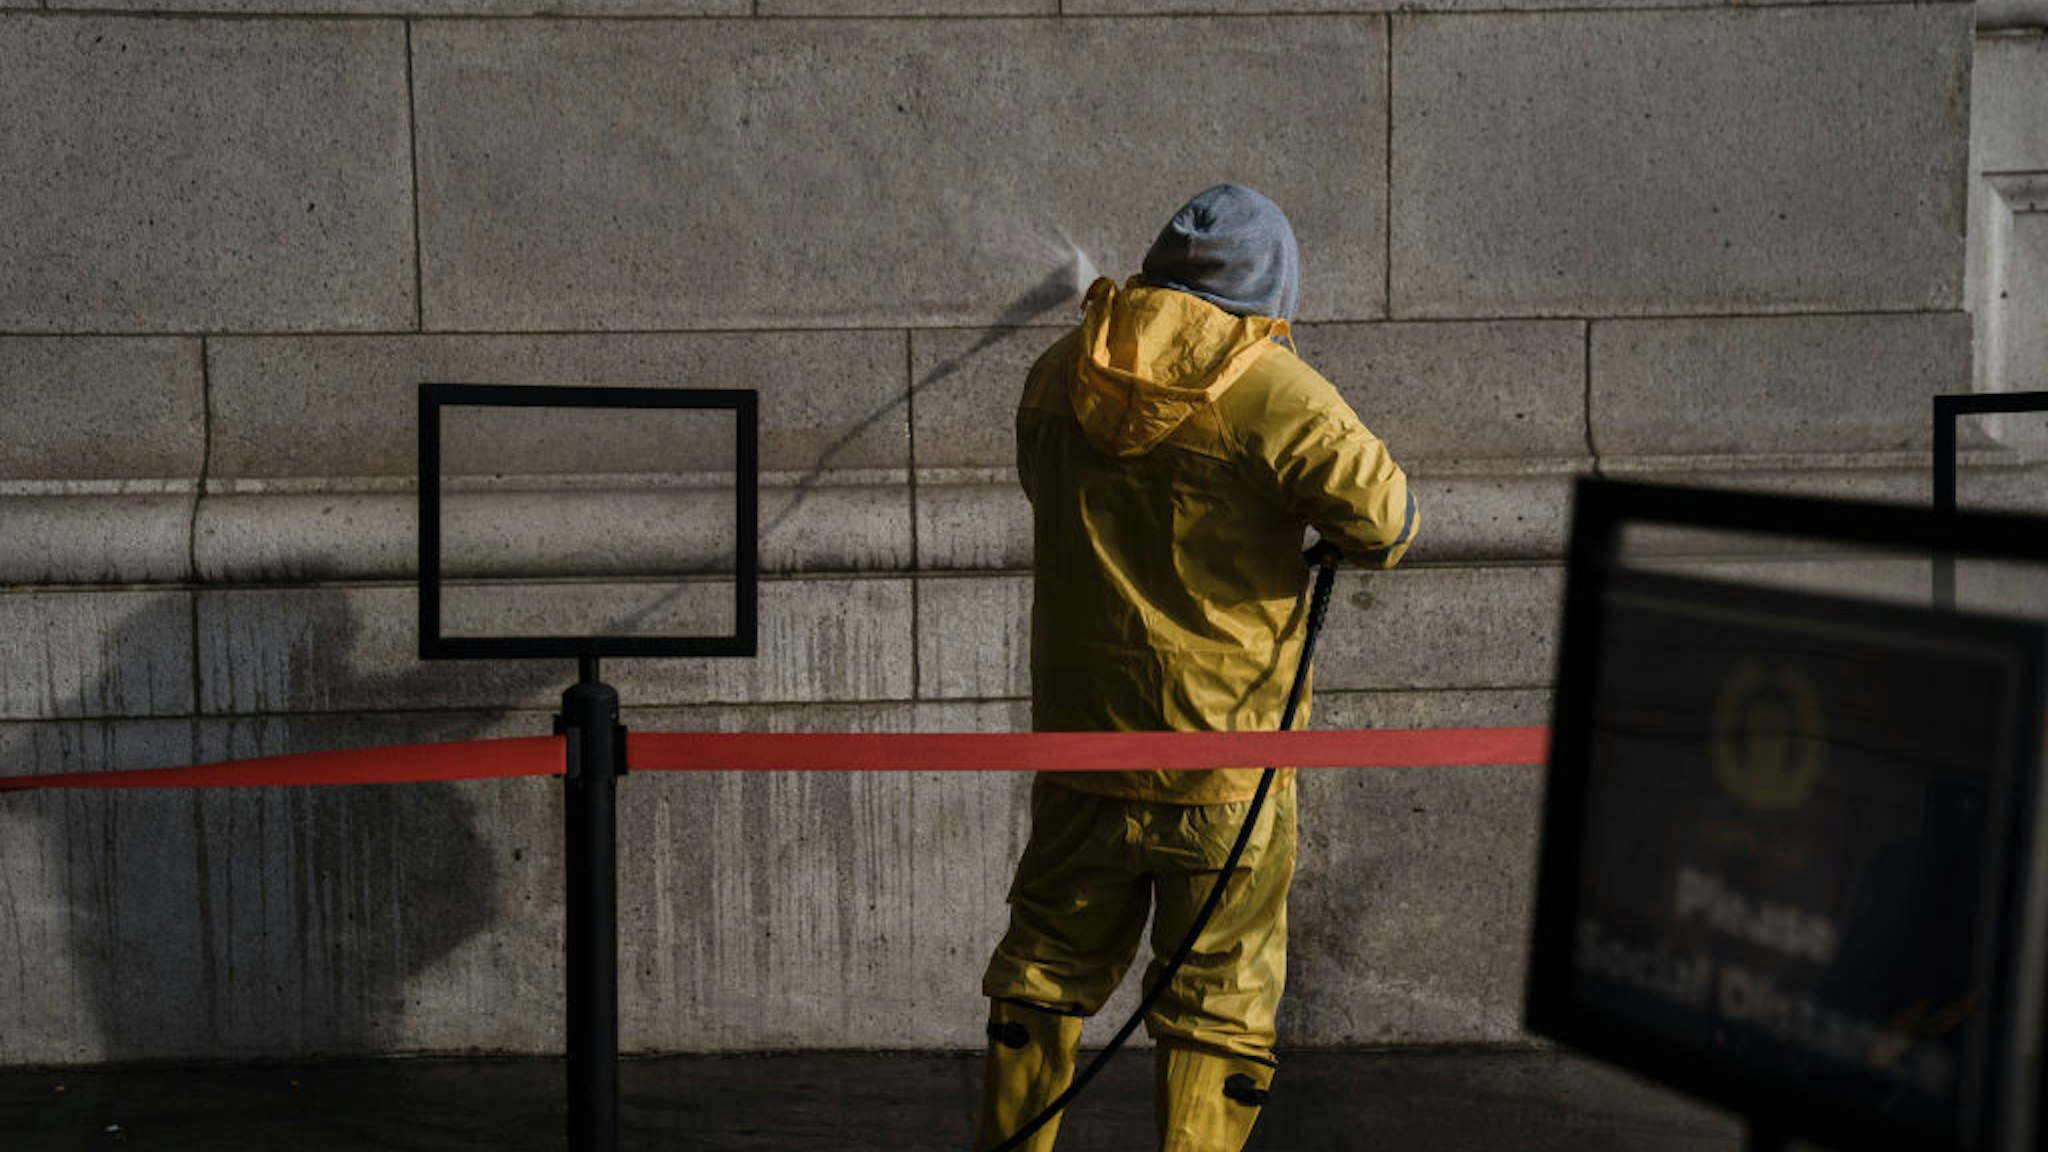 A worker pressure washes a wall at Union Station to clean off swastikas and anti-Obama slogans that were drawn on the exterior of the building on Wednesday, Feb. 2, 2022 in Washington, DC.